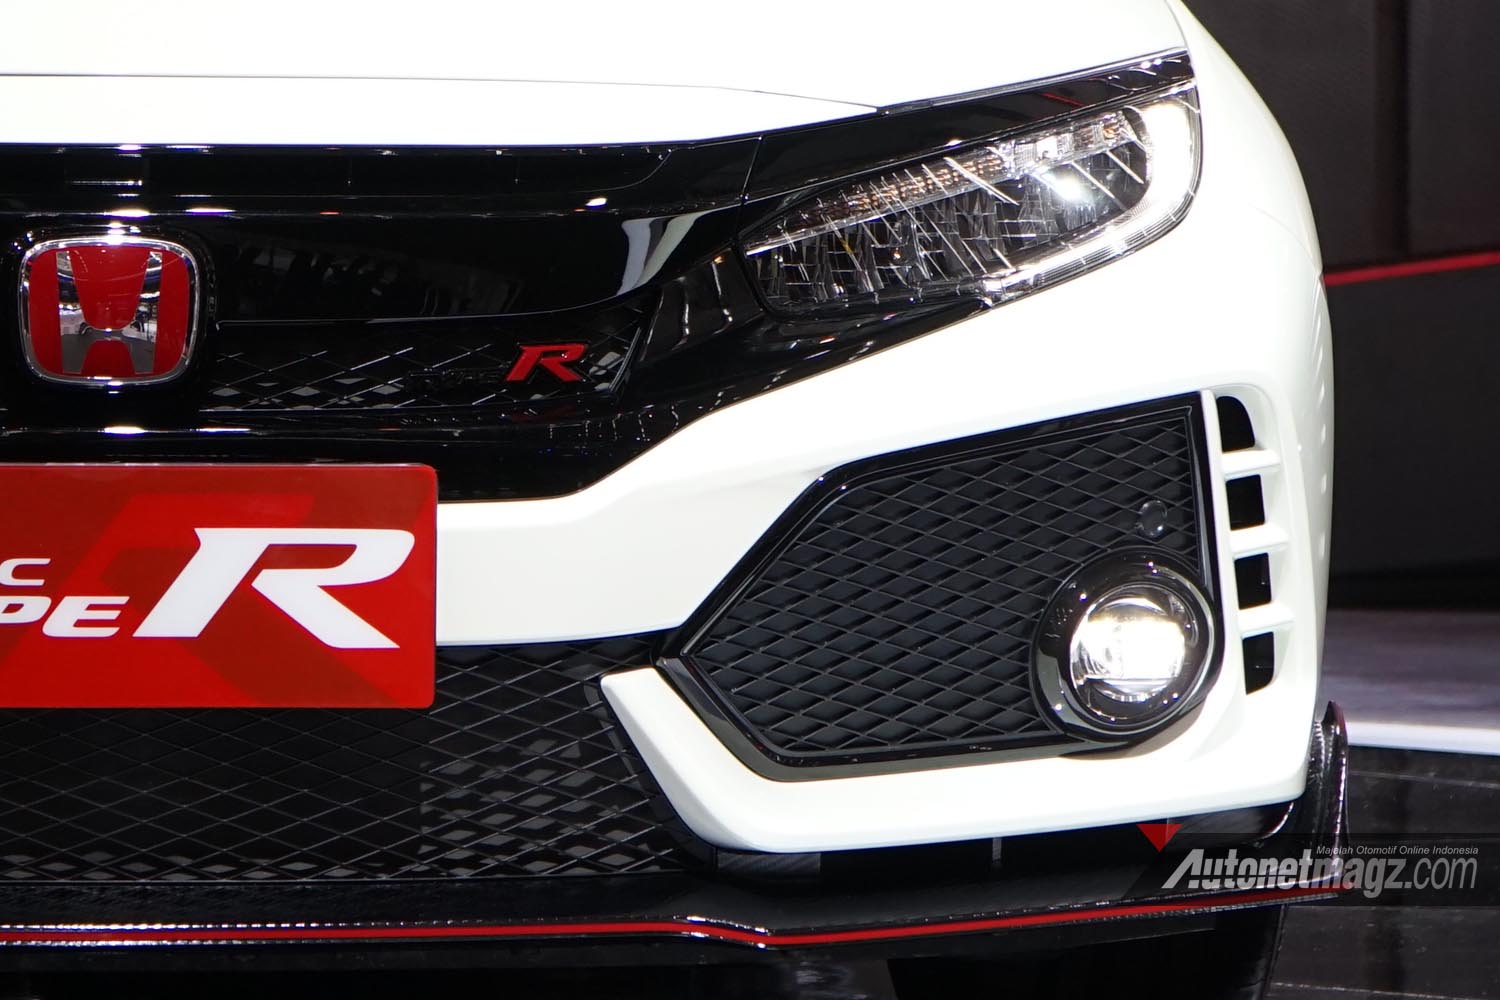 GIIAS 2017, honda civic type r fk8 indonesia giias 2017 front vents air curtain: First Impression Review Honda Civic Type R 2017 Indonesia